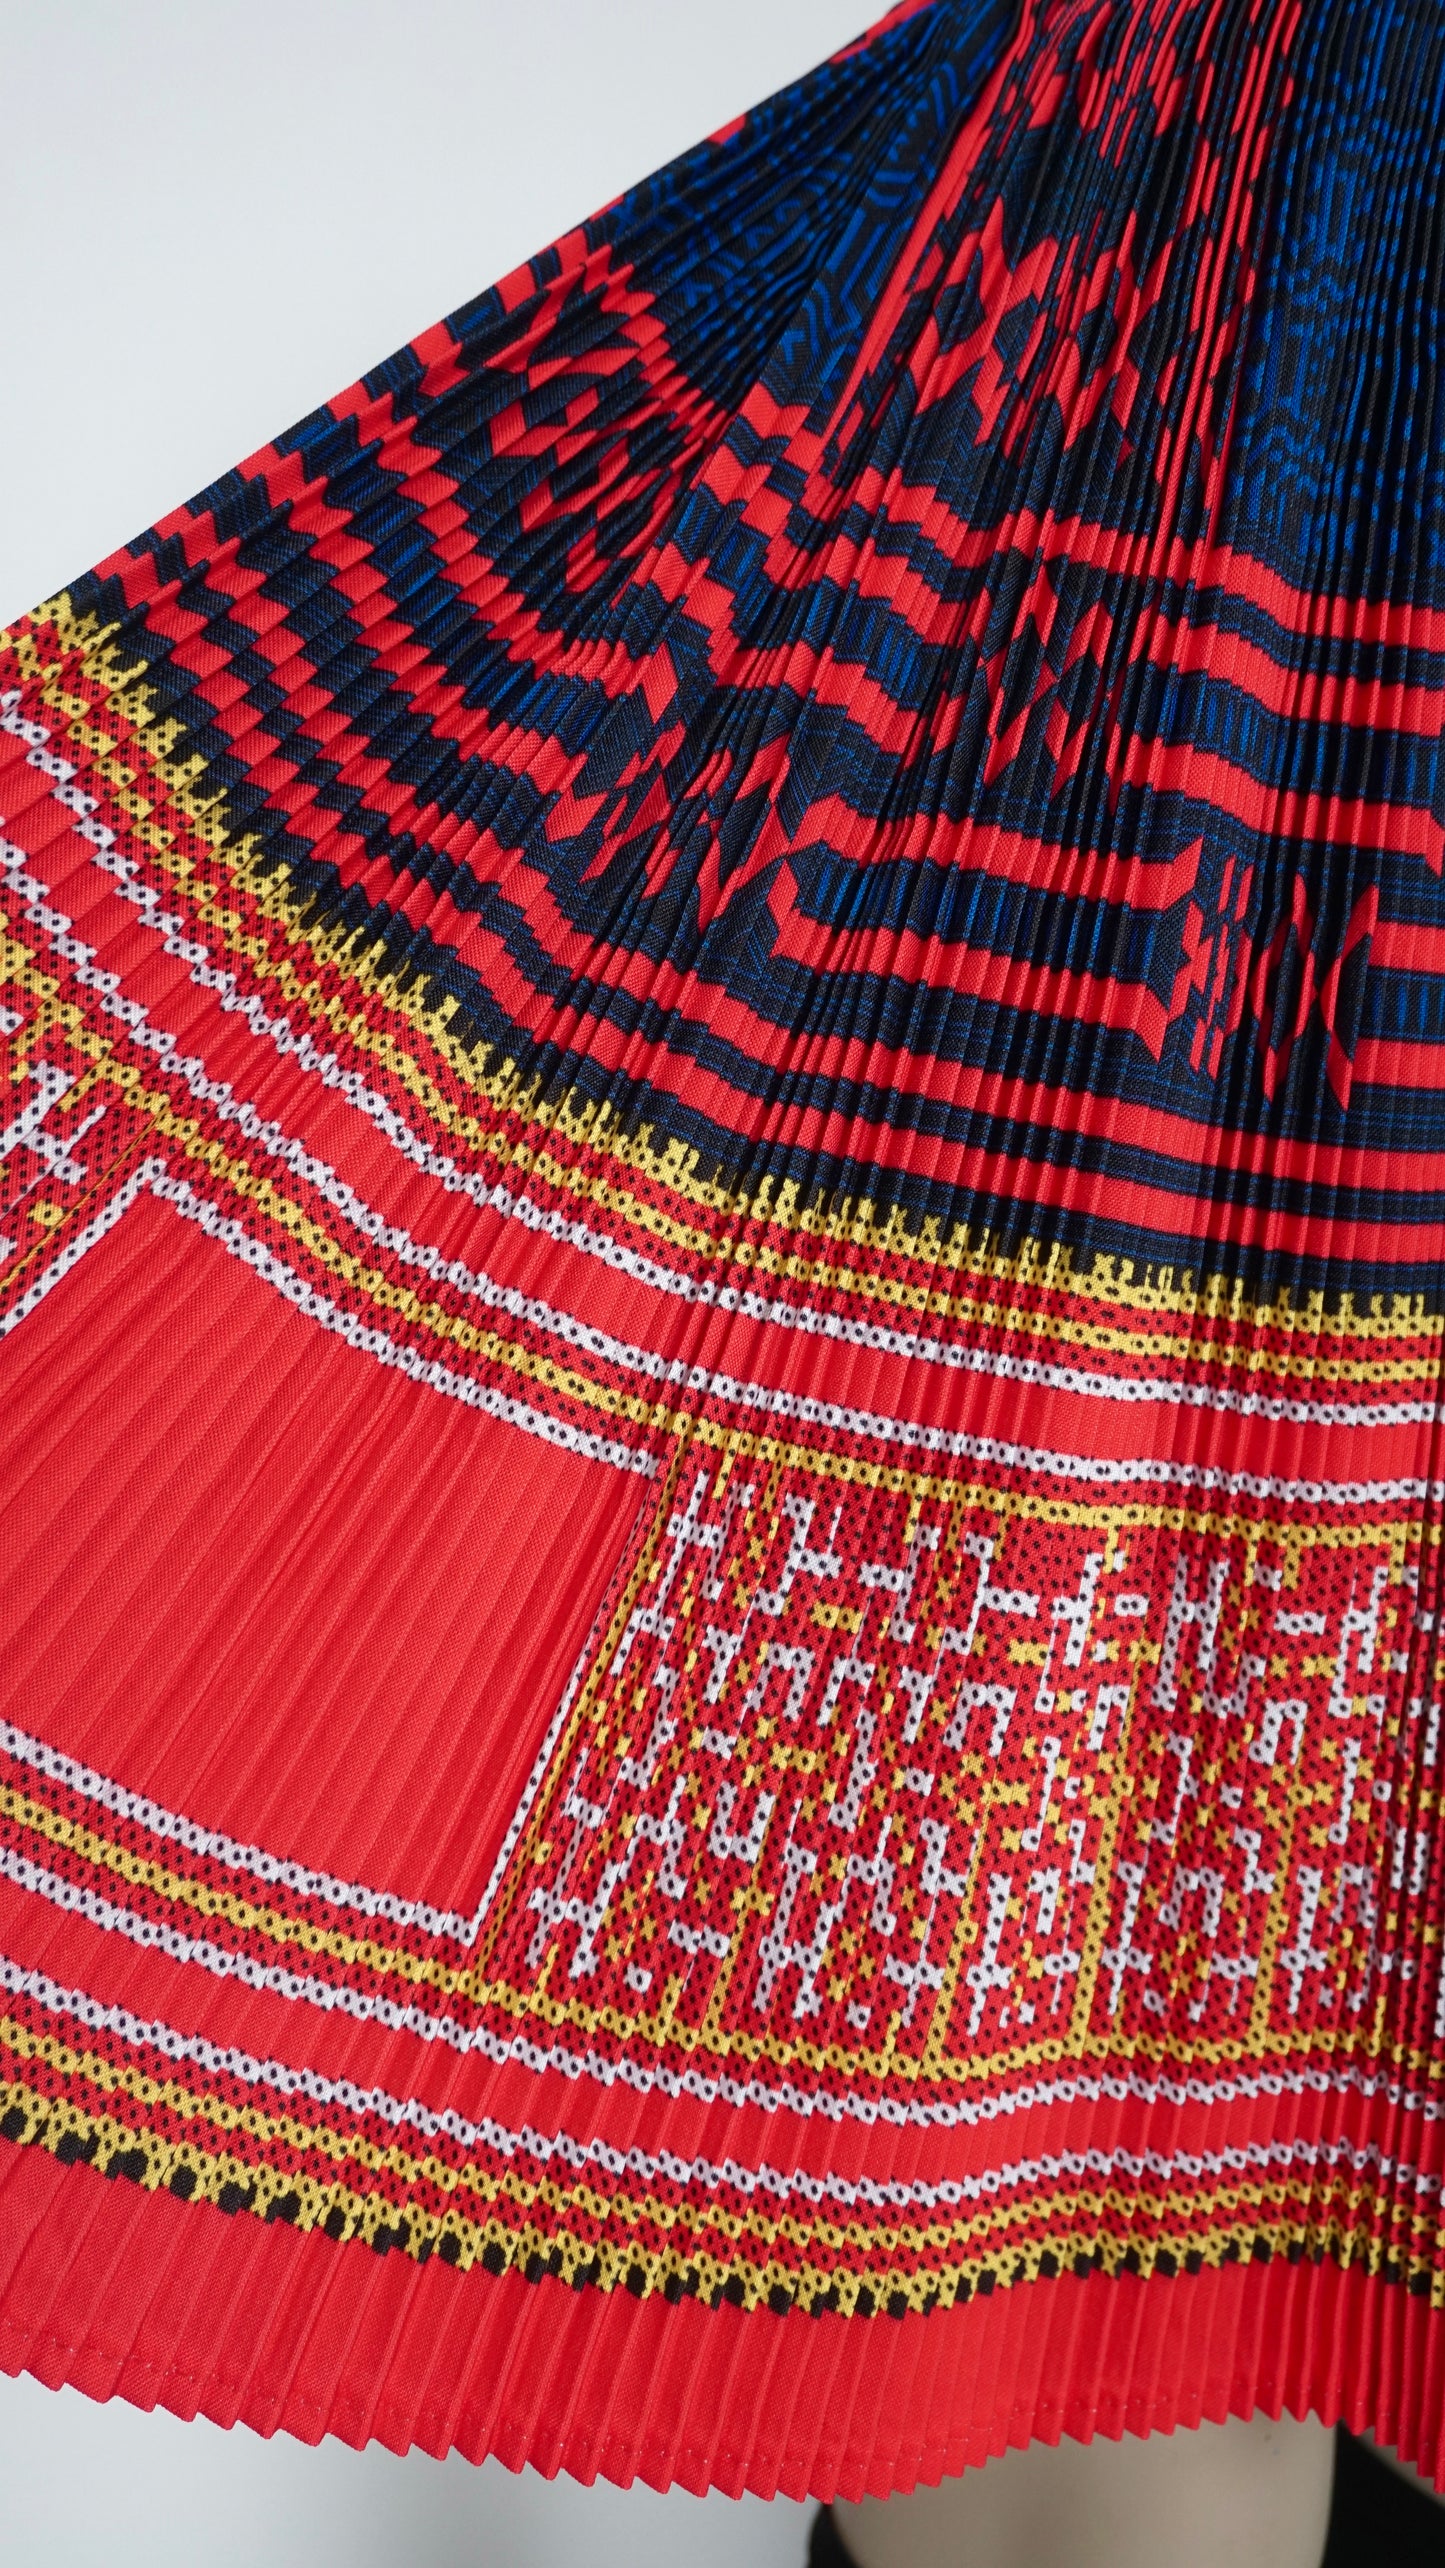 Printed Red Skirt